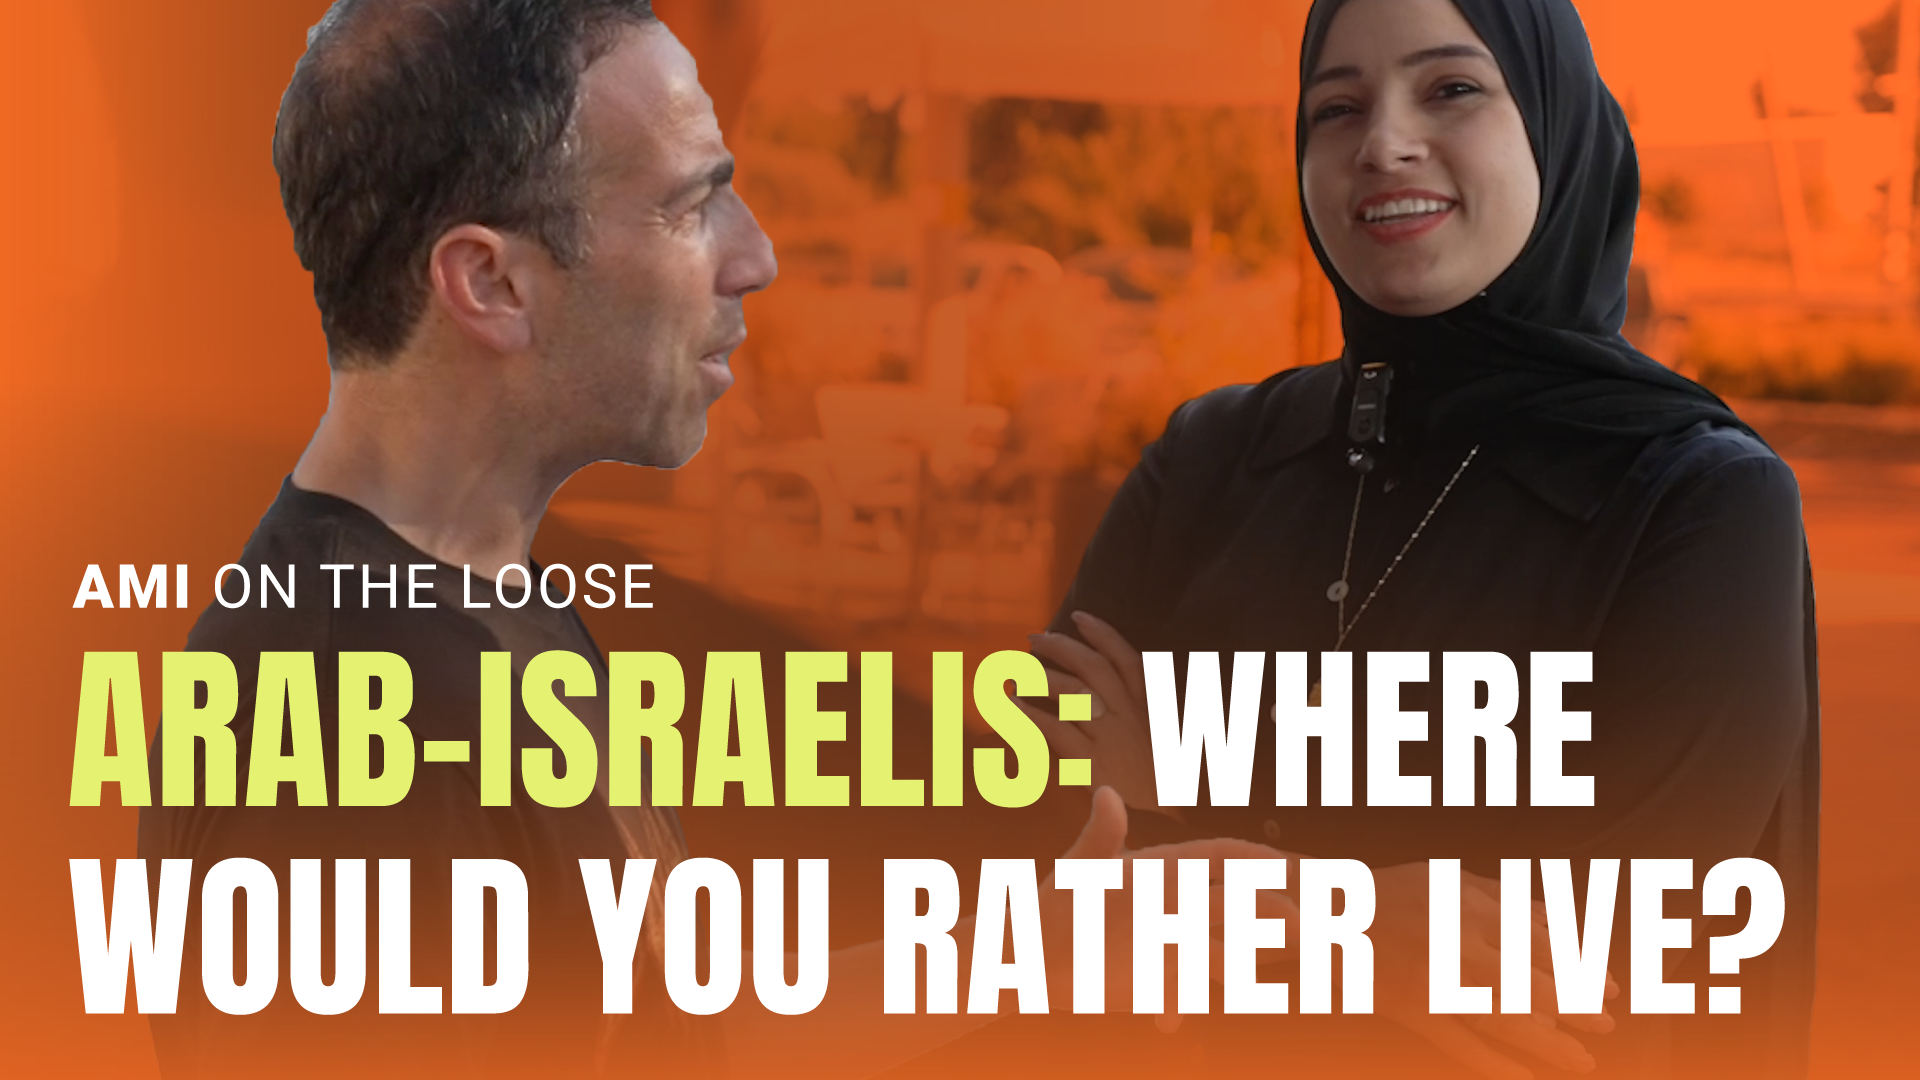 Arab-Israelis: Where Would You Rather Live?